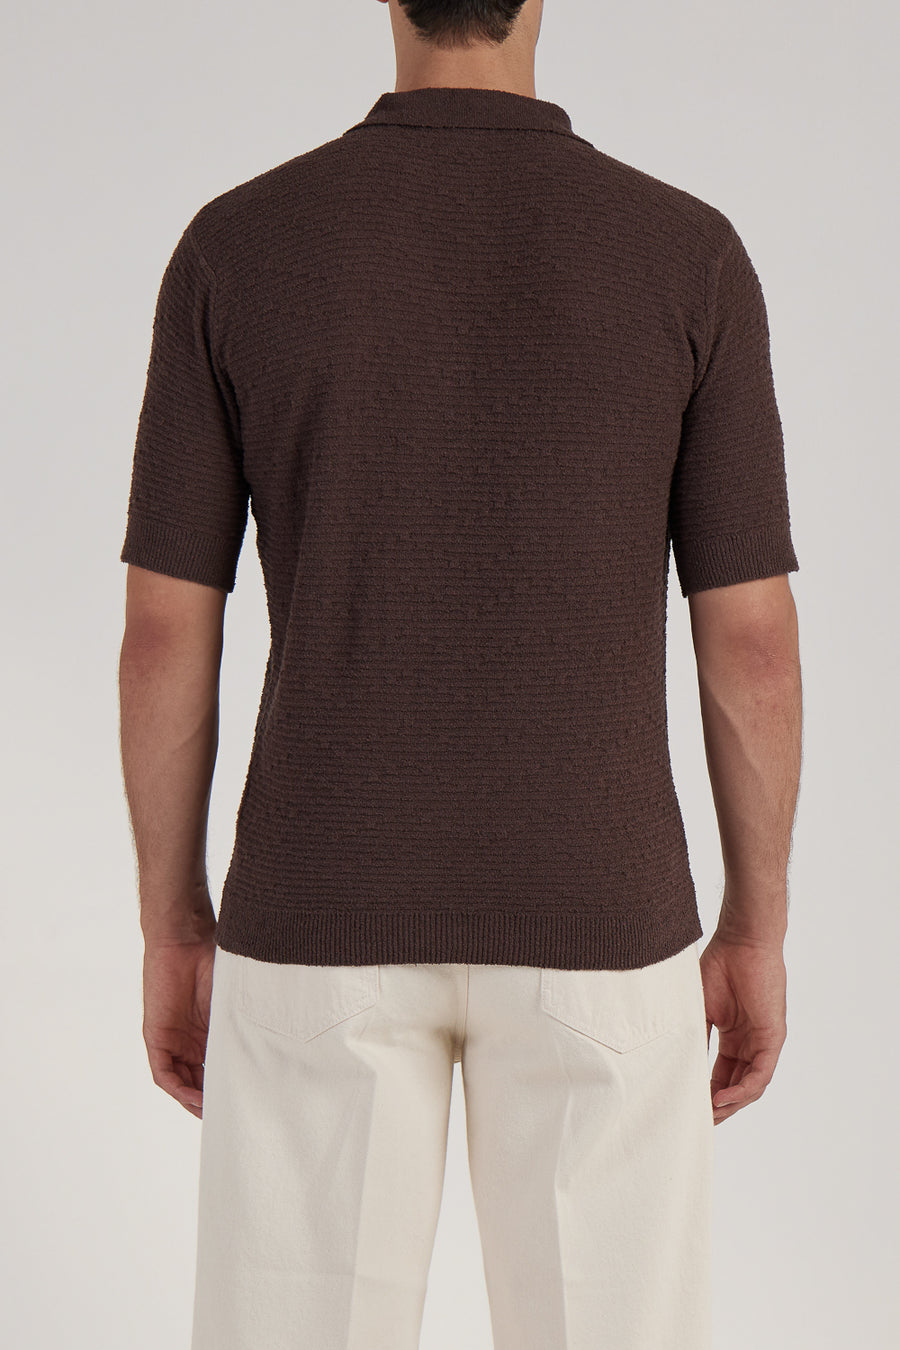 Buy the Daniele Fiesoli Ribbed Polo in Brown at Intro. Spend £50 for free UK delivery. Official stockists. We ship worldwide.